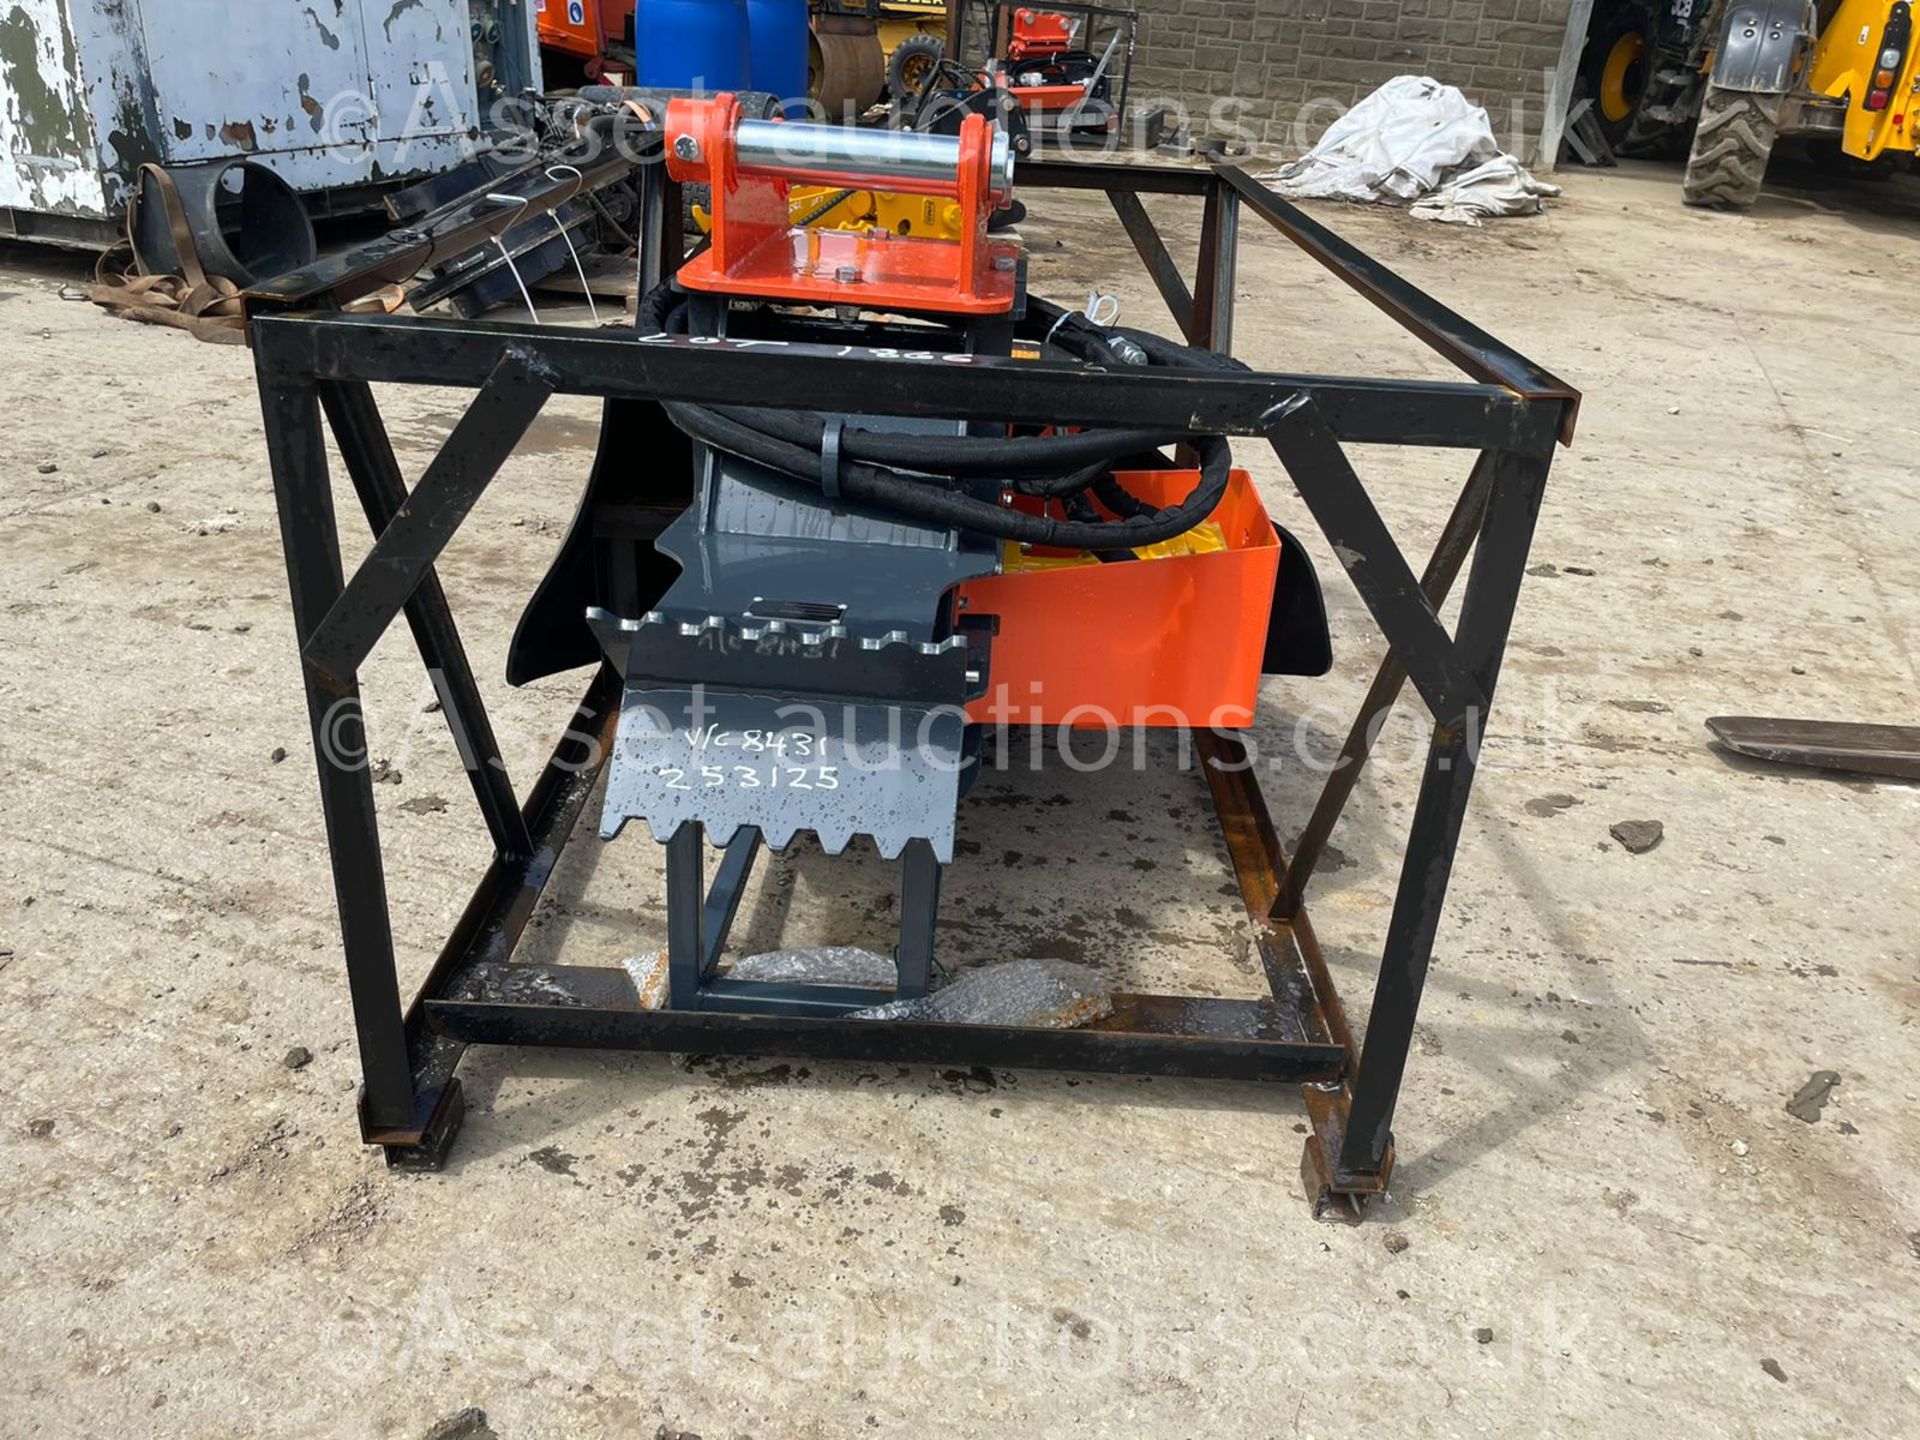 NEW AND UNUSED HEAVY DUTY 18" STUMP GRINDER, HYDRAULIC DRIVEN, 50mm PINS *PLUS VAT* - Image 9 of 16